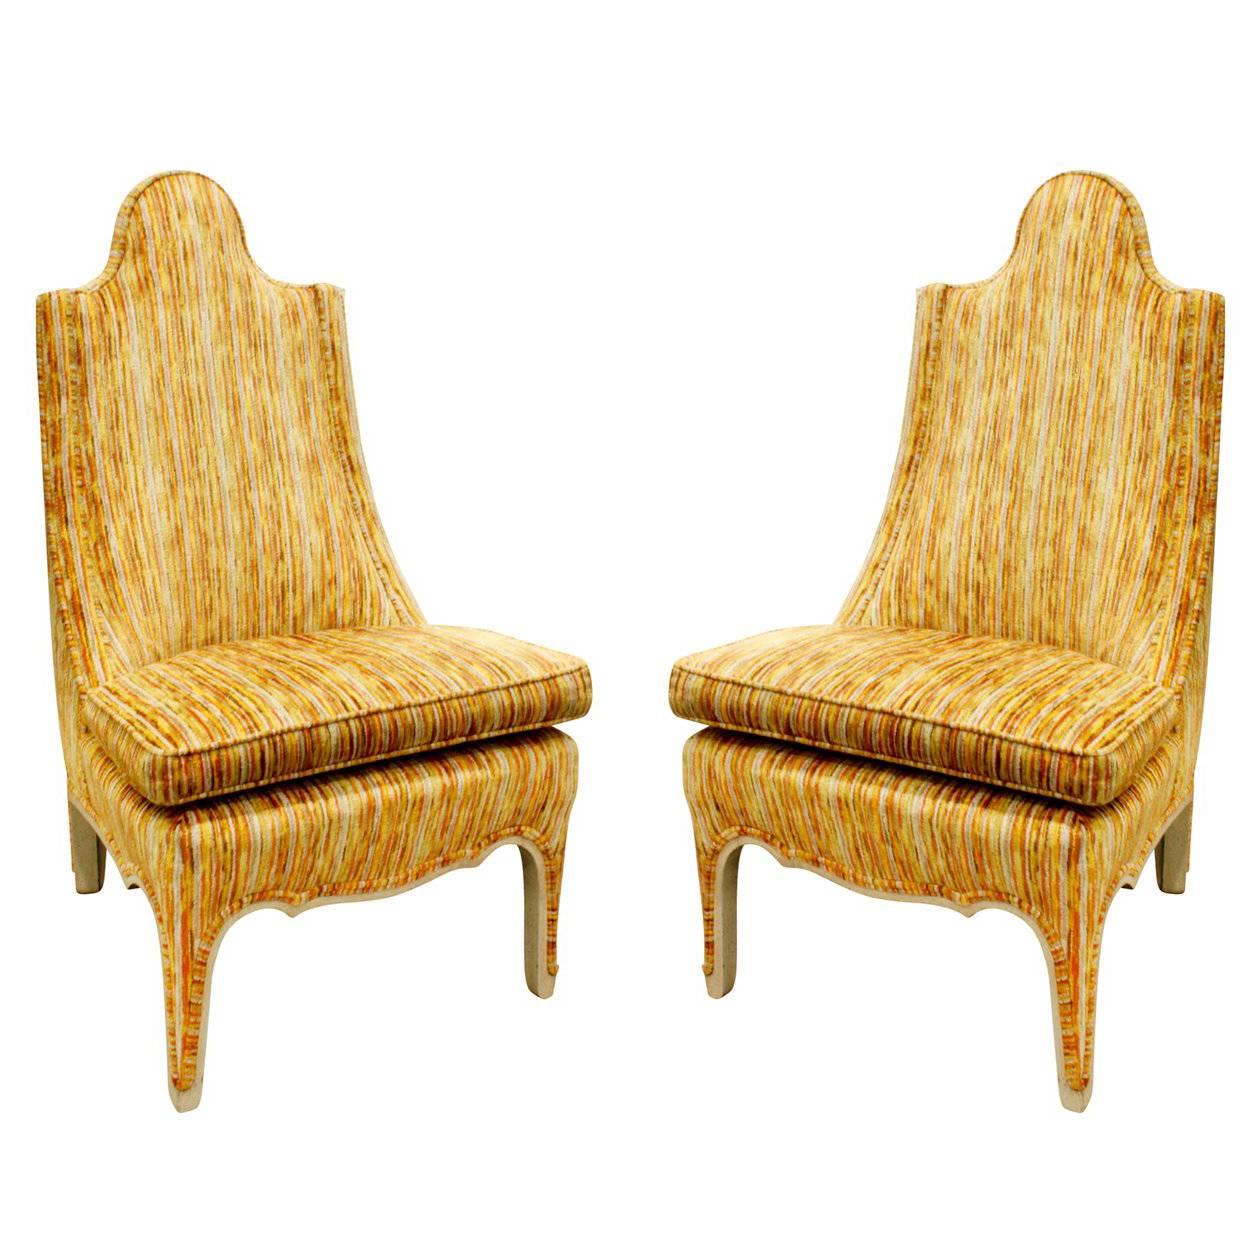 Pair of Stylish Slipper Chairs with Lacquered Wood Trim, 1960s